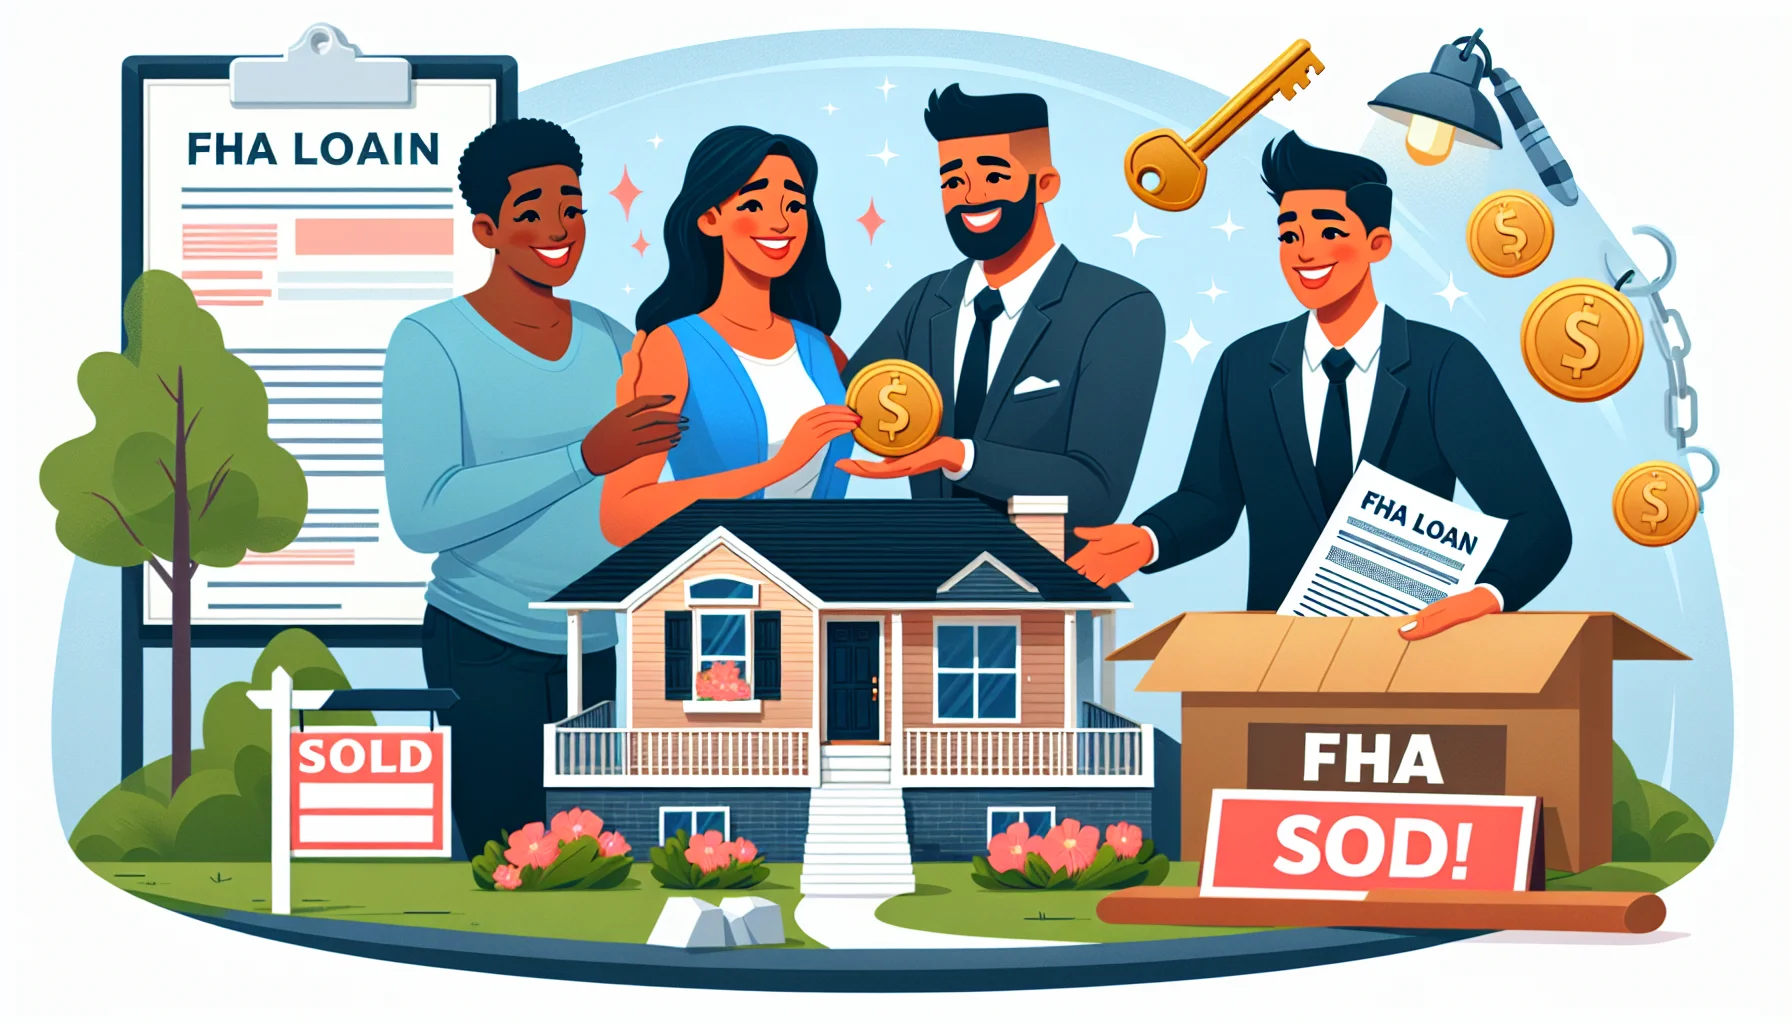 Envision a scene encompassing the ideal set-up for first-time home buyers with FHA loans. The image displays a cozy, modern house with a 'Sold' sign proudly displayed at the front. An ecstatic couple, one a Black female and the other a Hispanic male, holding a large key, symbolizing their successful purchase. Behind them, a professional real estate agent, a Middle-Eastern woman hands over documents, signifying FHA loan approvals and requirements fulfilled. The entire scene is filled with positive energy and excitement, giving a sense of achievement and immense joy.